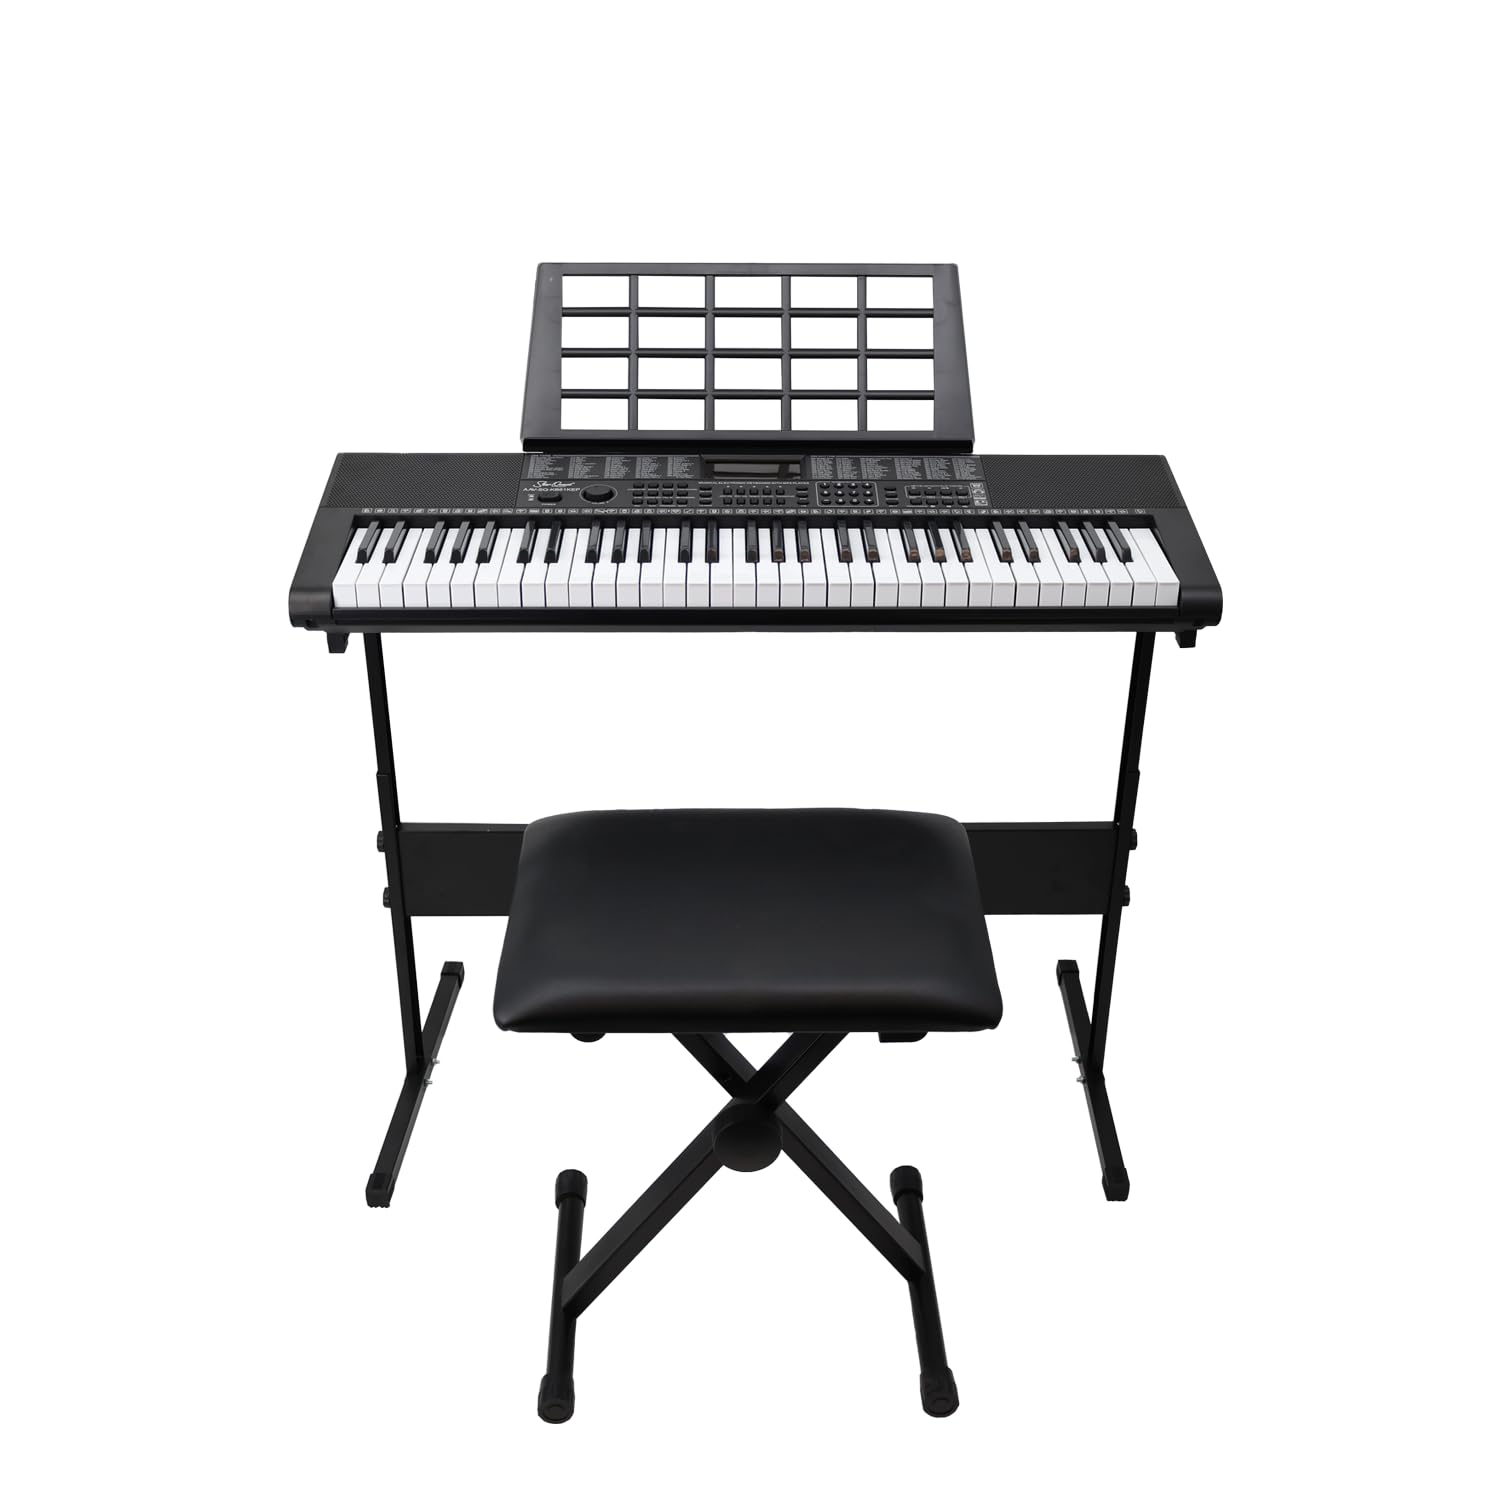 StarQuest SQ-KB61KEP 61-Key Portable Electronic Keyboard – Digital Piano for Beginners and Experienced Musicians, Multi-Functional, Premium Sound Quality